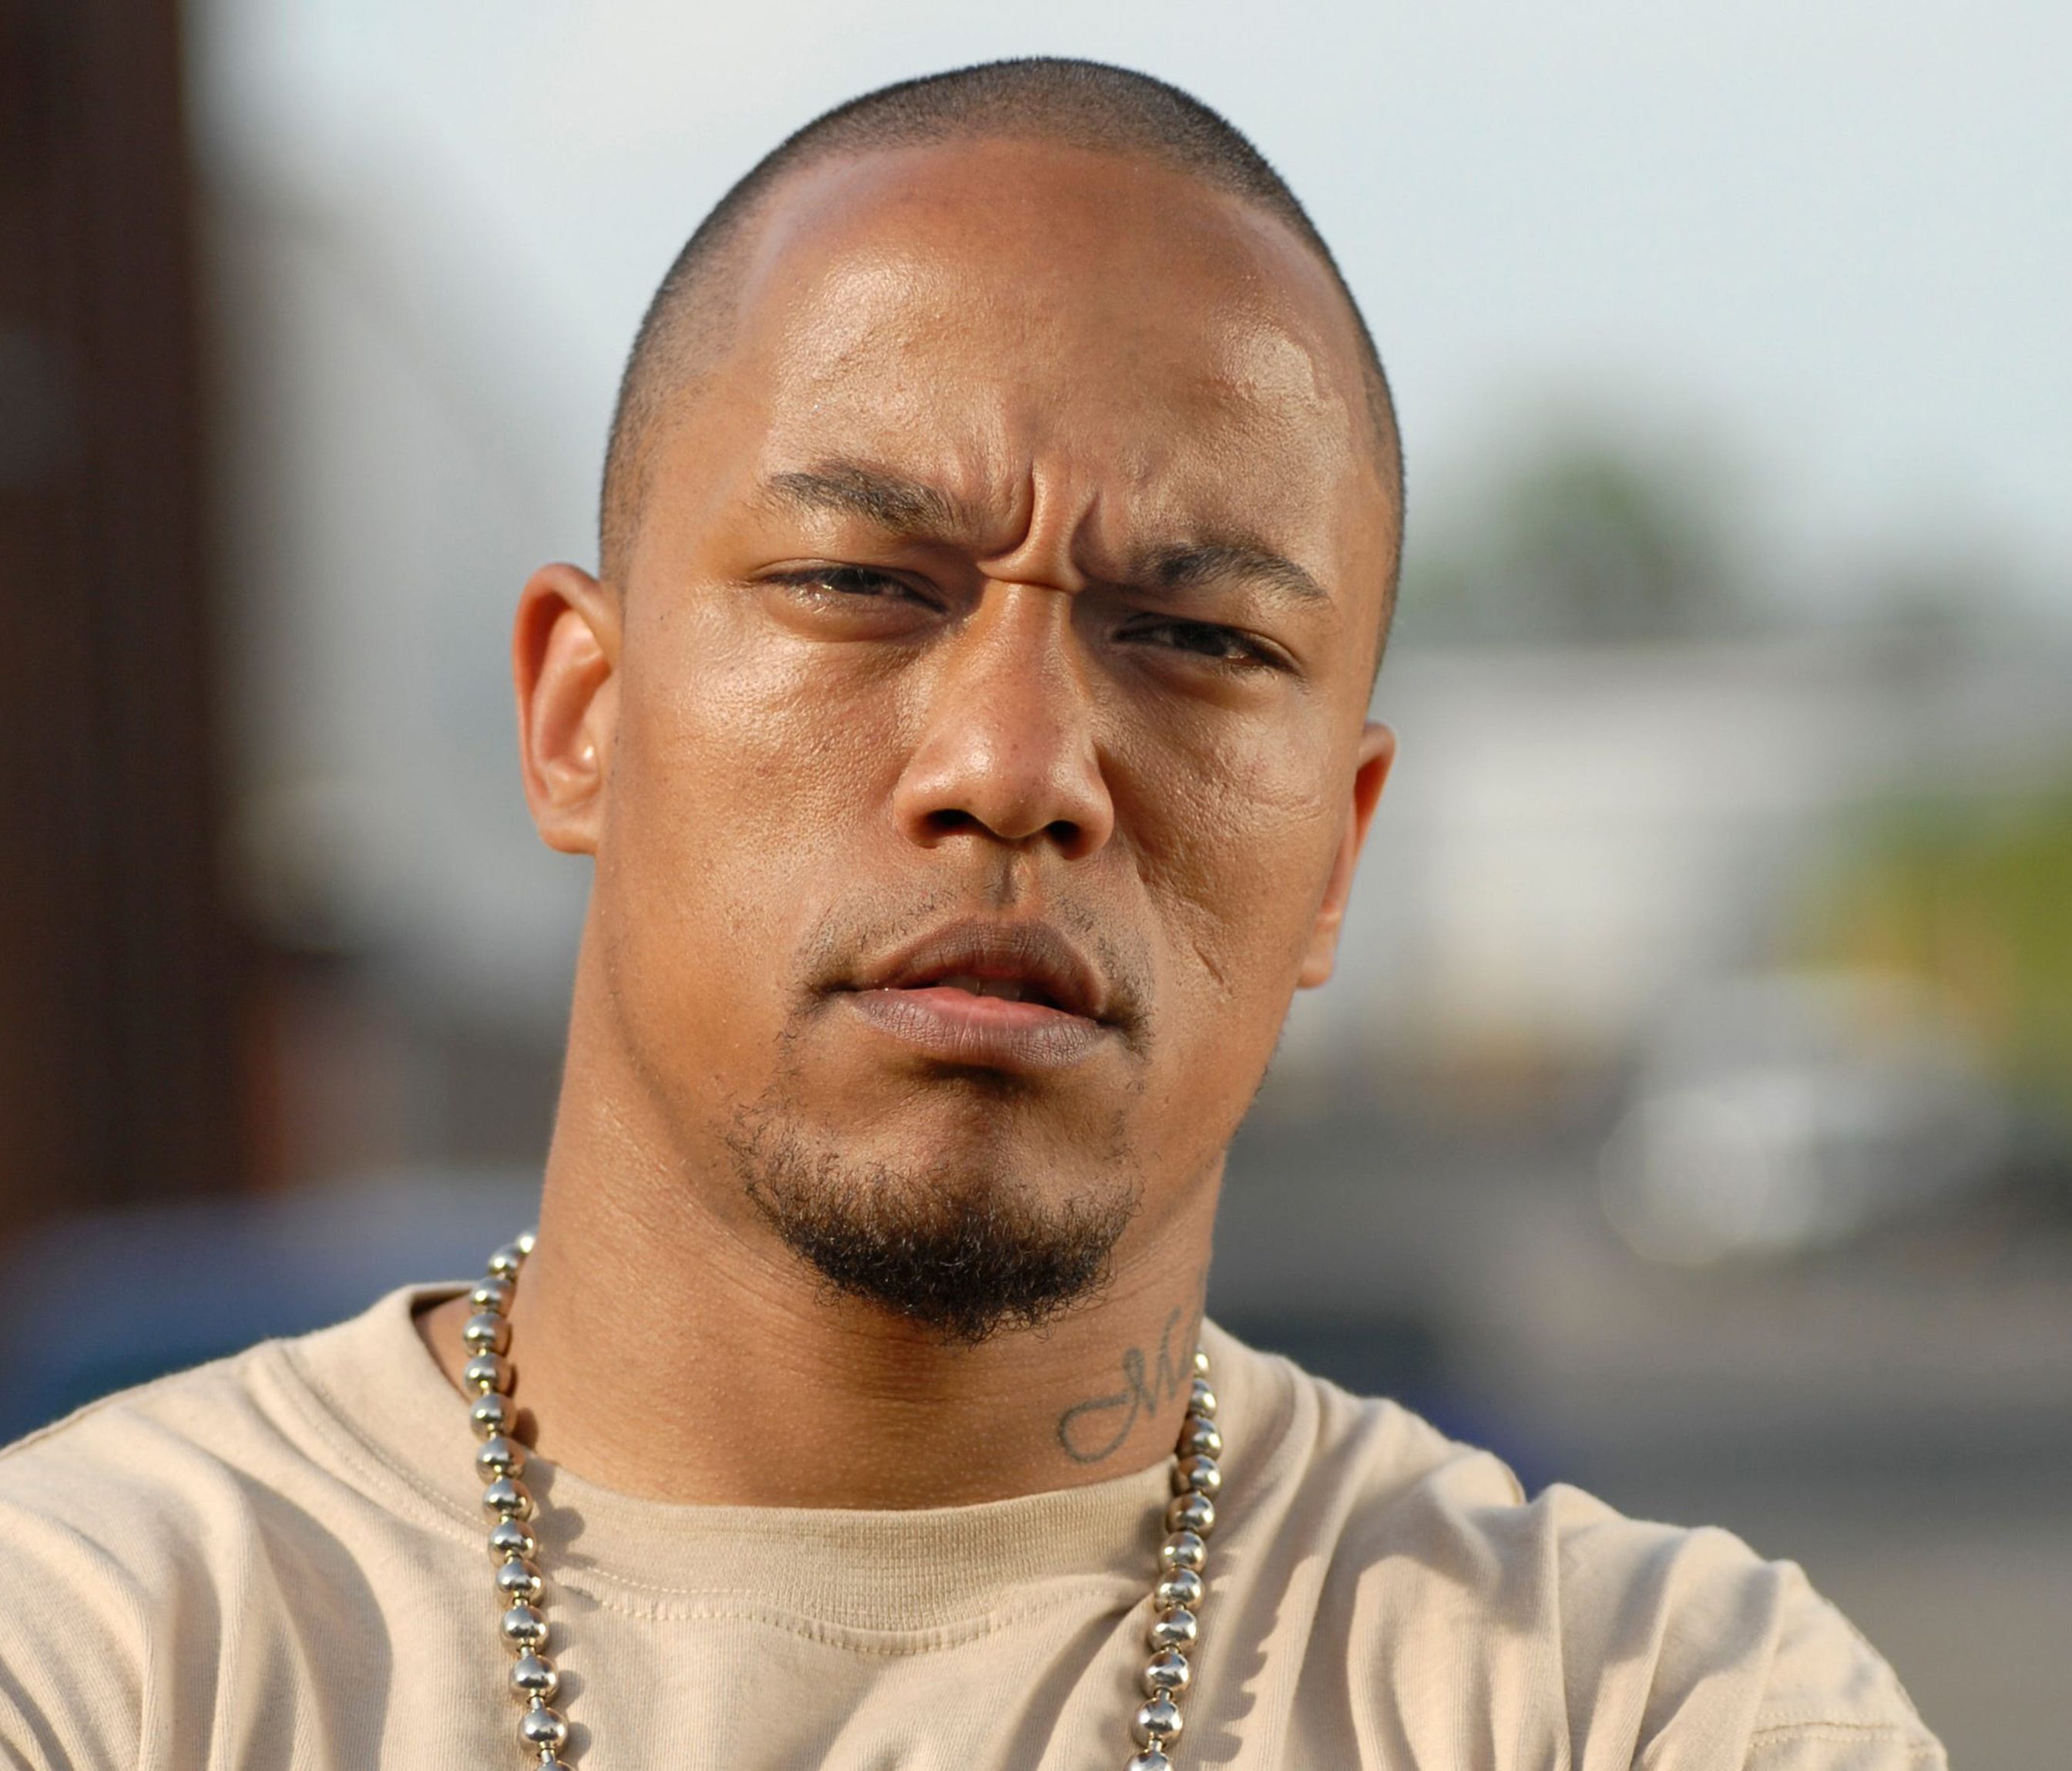 Denis Cuspert, a Berlin rapper who went by the name of Deso Dogg in 2005 when this photo was taken, is now on the U.S. terror list because of his recruitment of jihadists on the Internet.